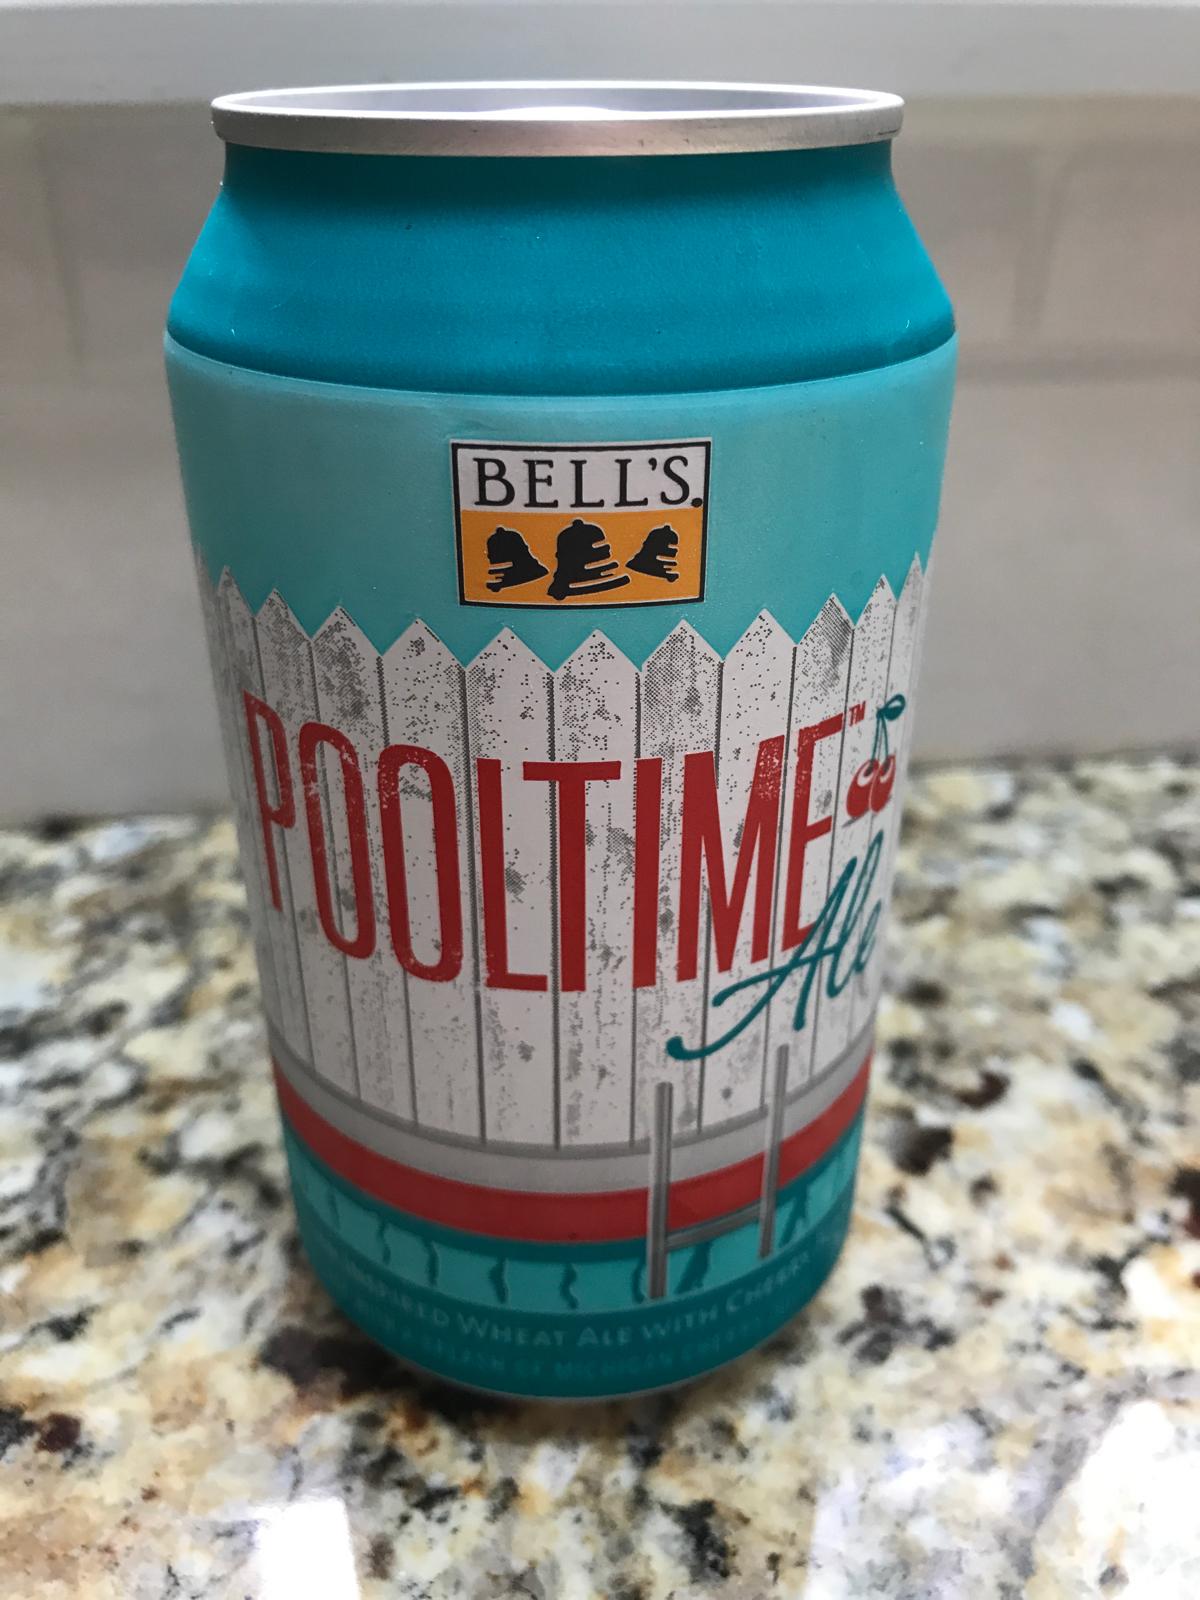 Pooltime Ale